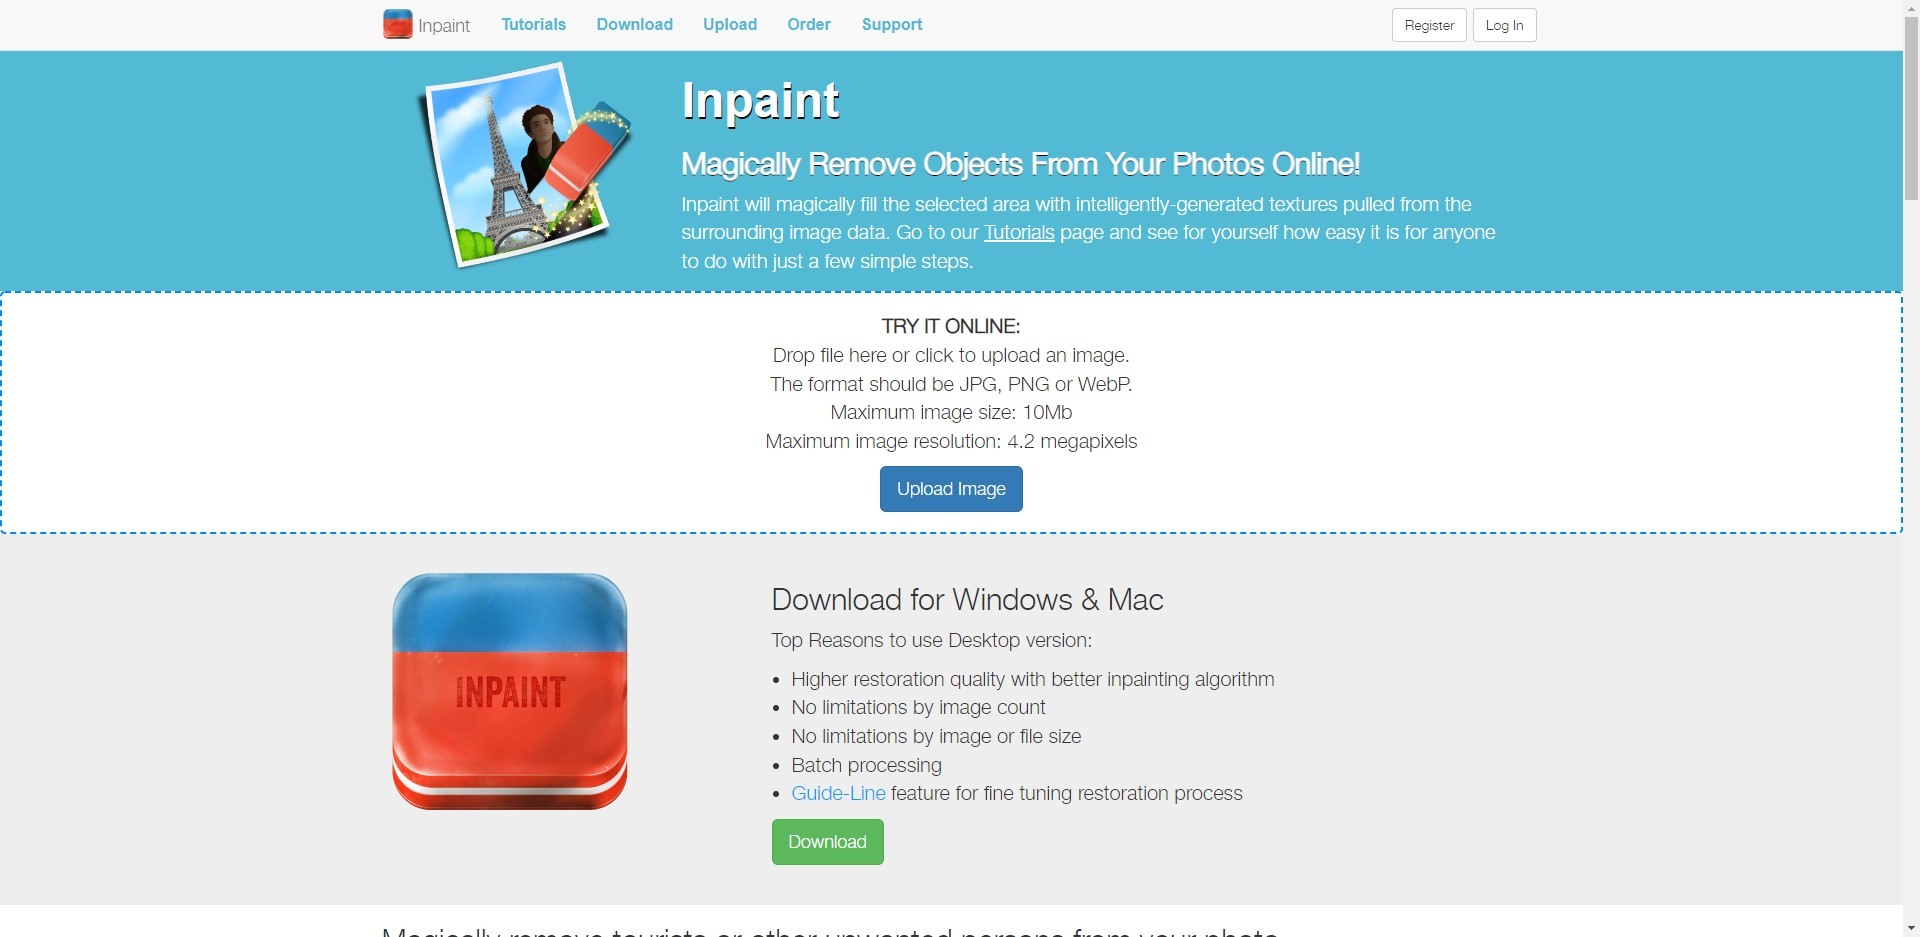 inpaint page with its logo